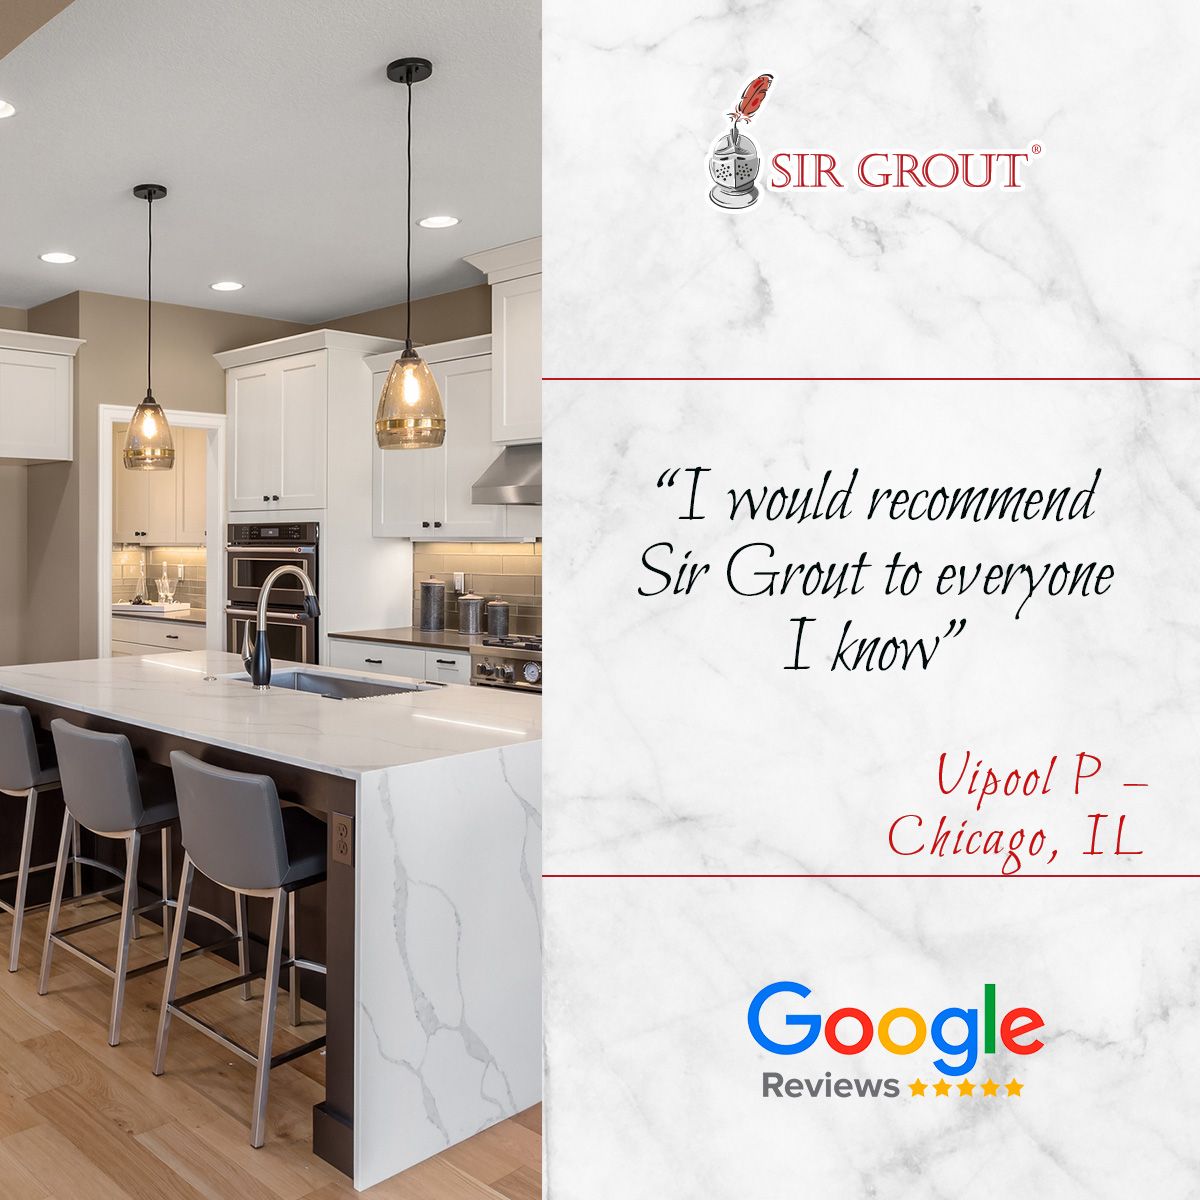 I would recommend Sir Grout to everyone I know